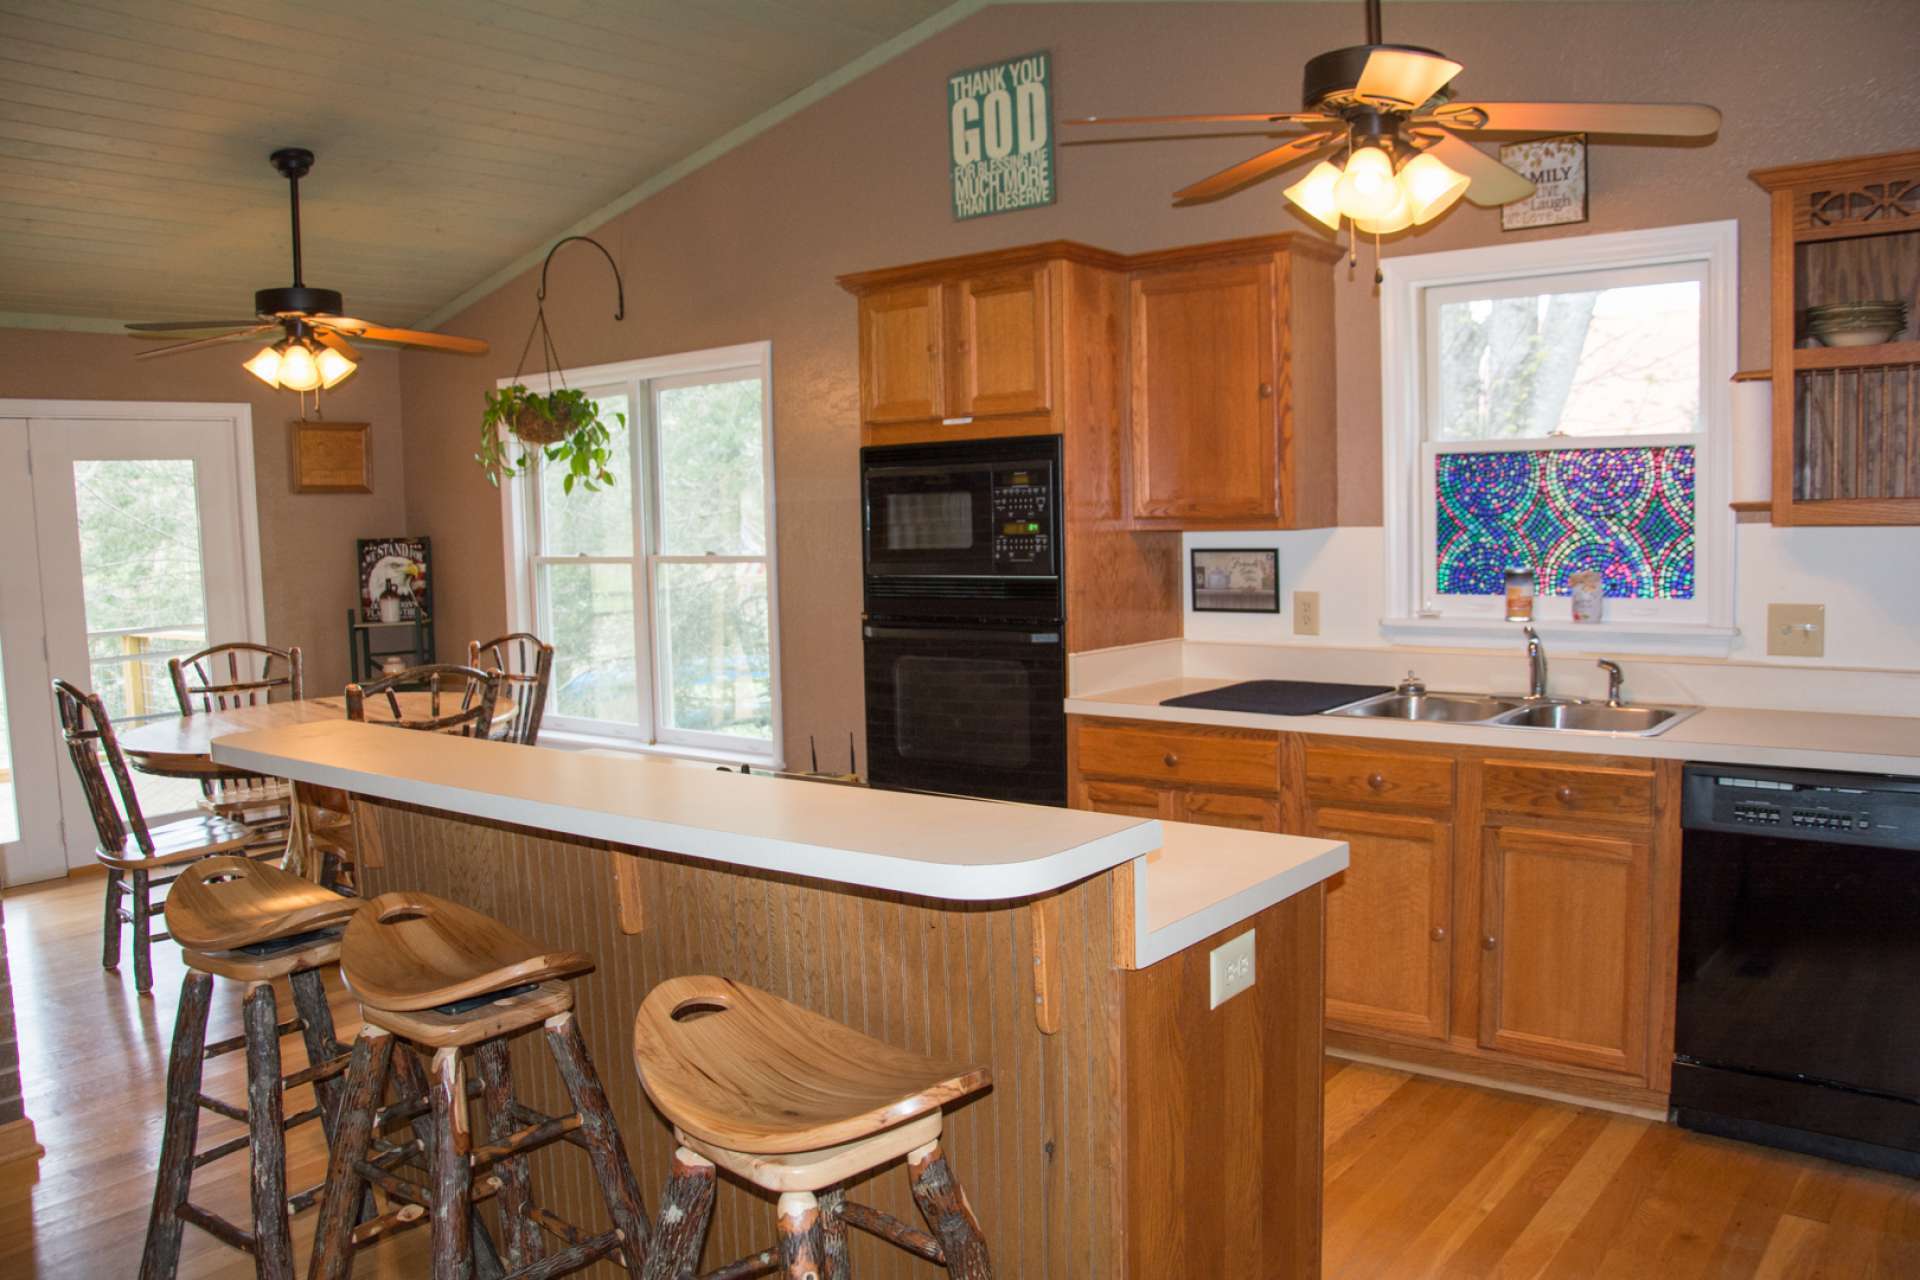 The kitchen offers plenty of work and storage  space that includes a bar with informal seating.